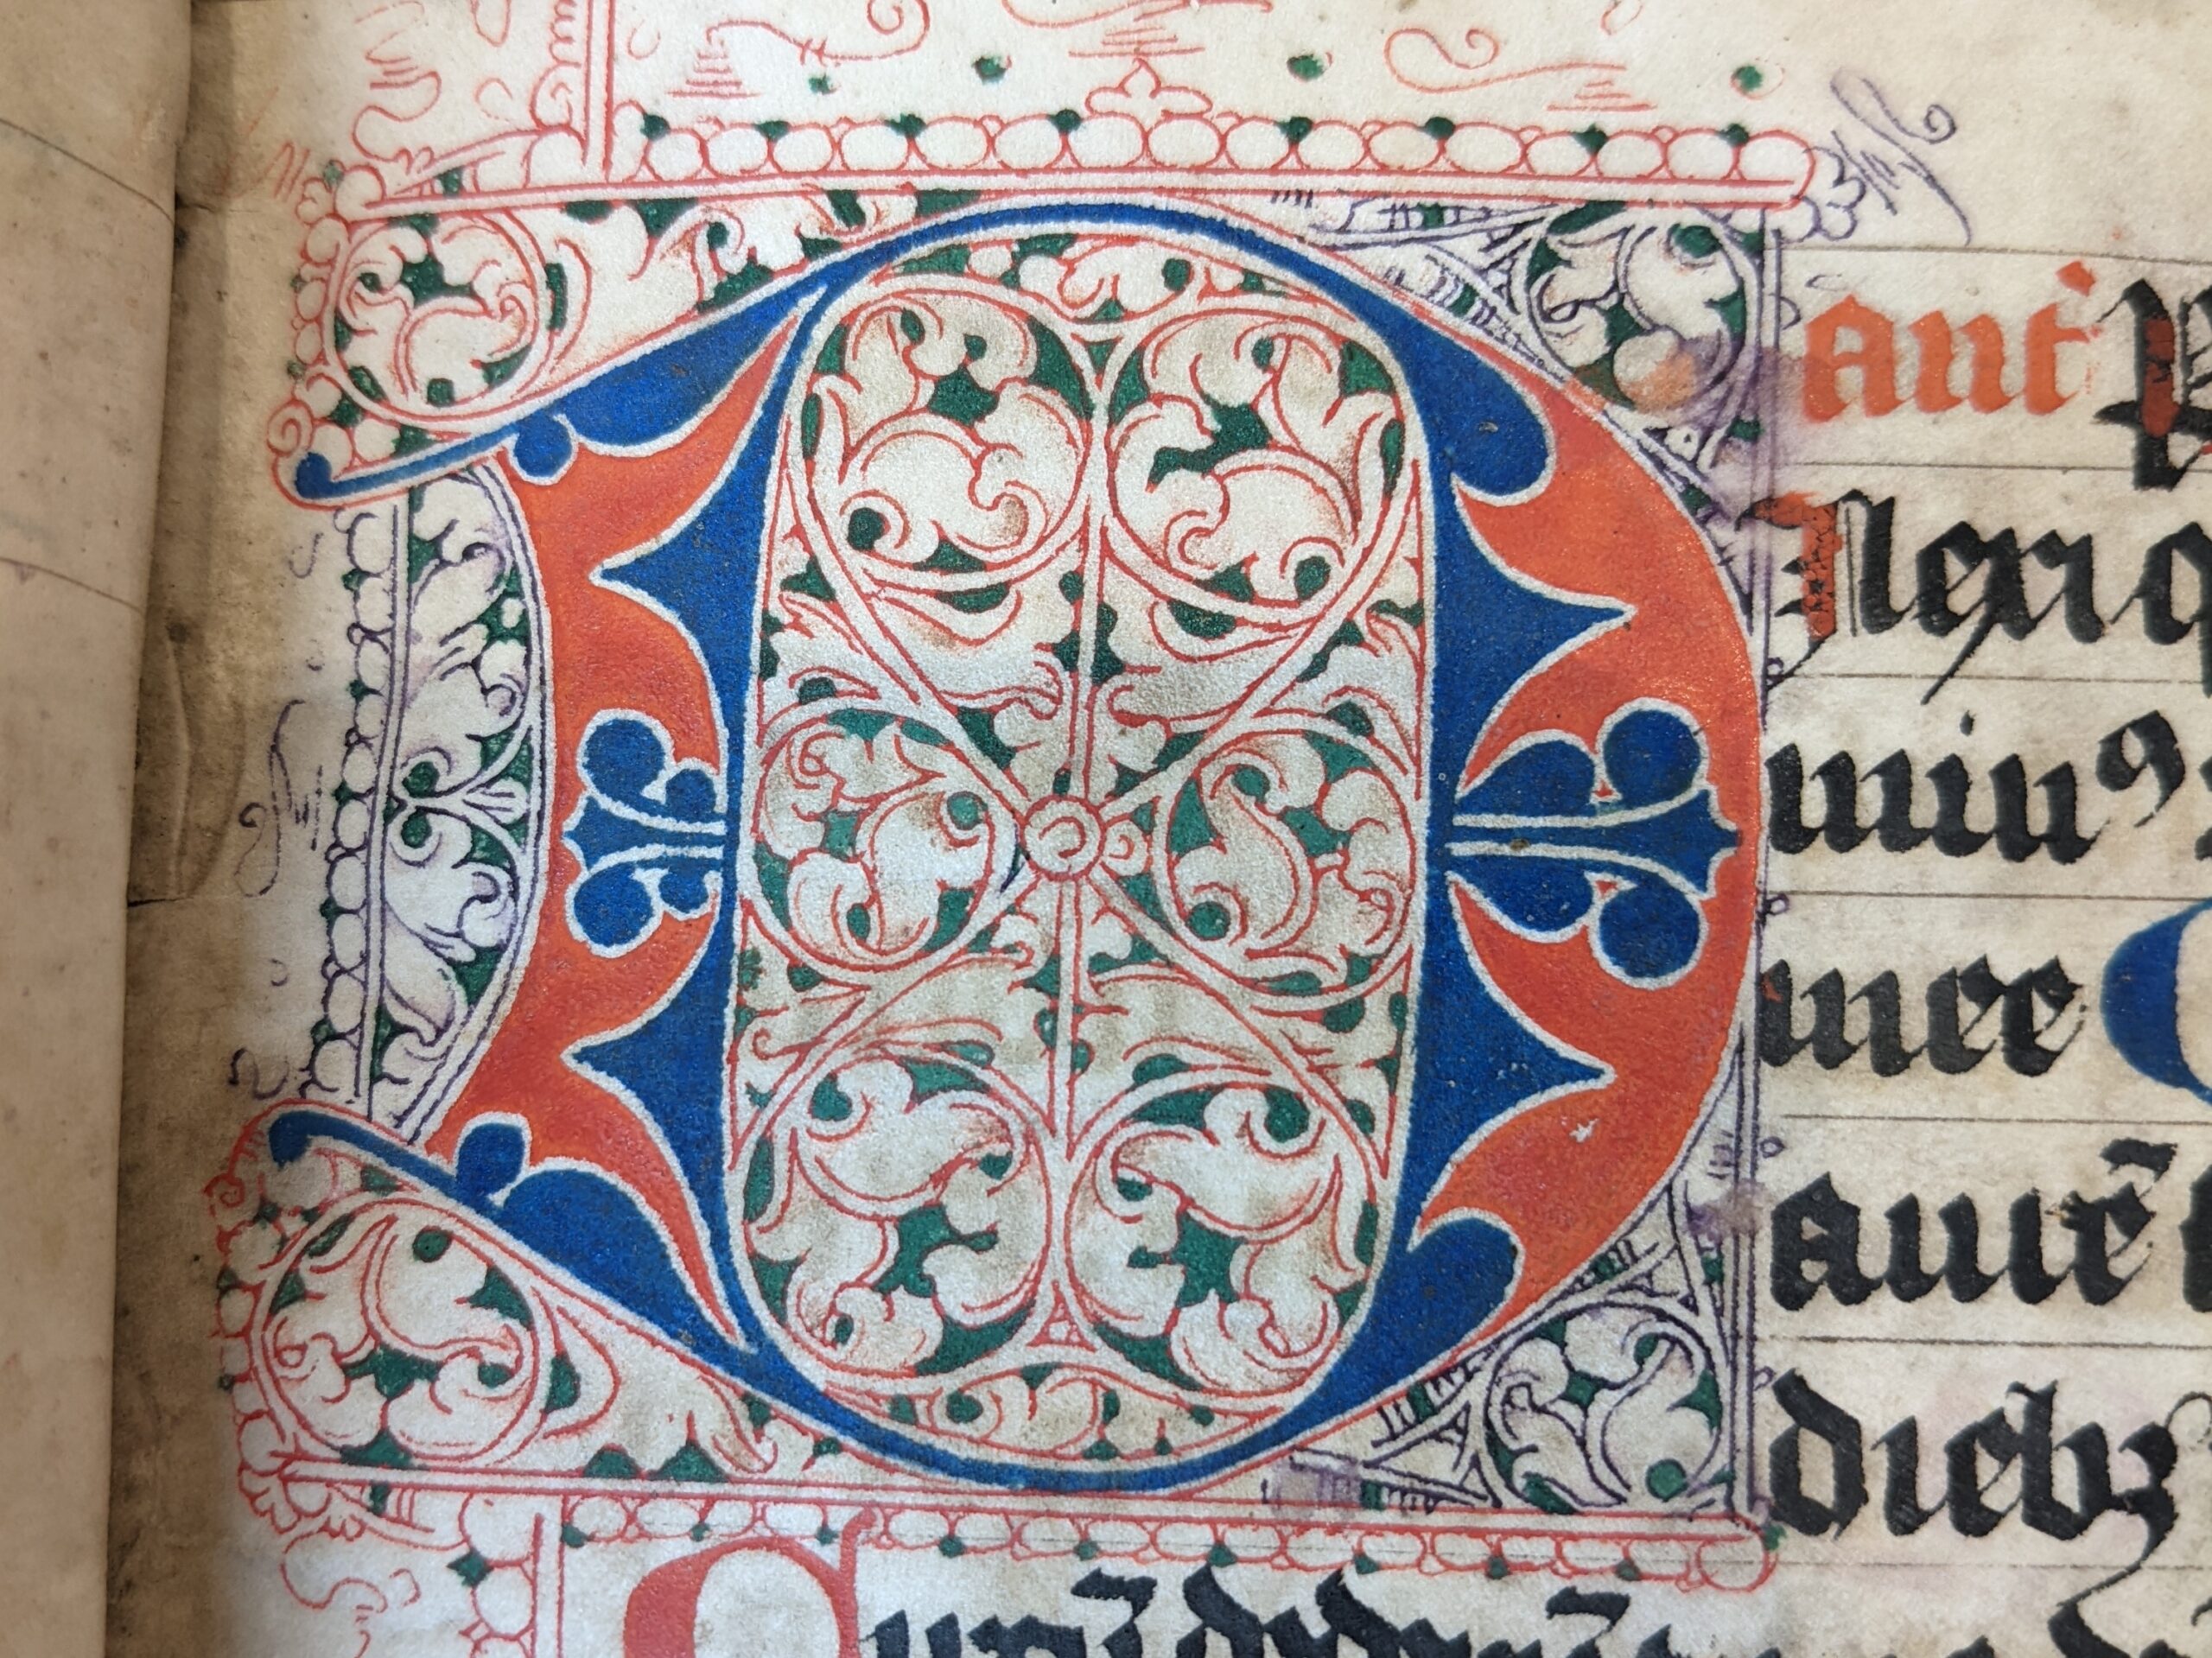 A large handwritten D surrounded by ornate penwork decoration.